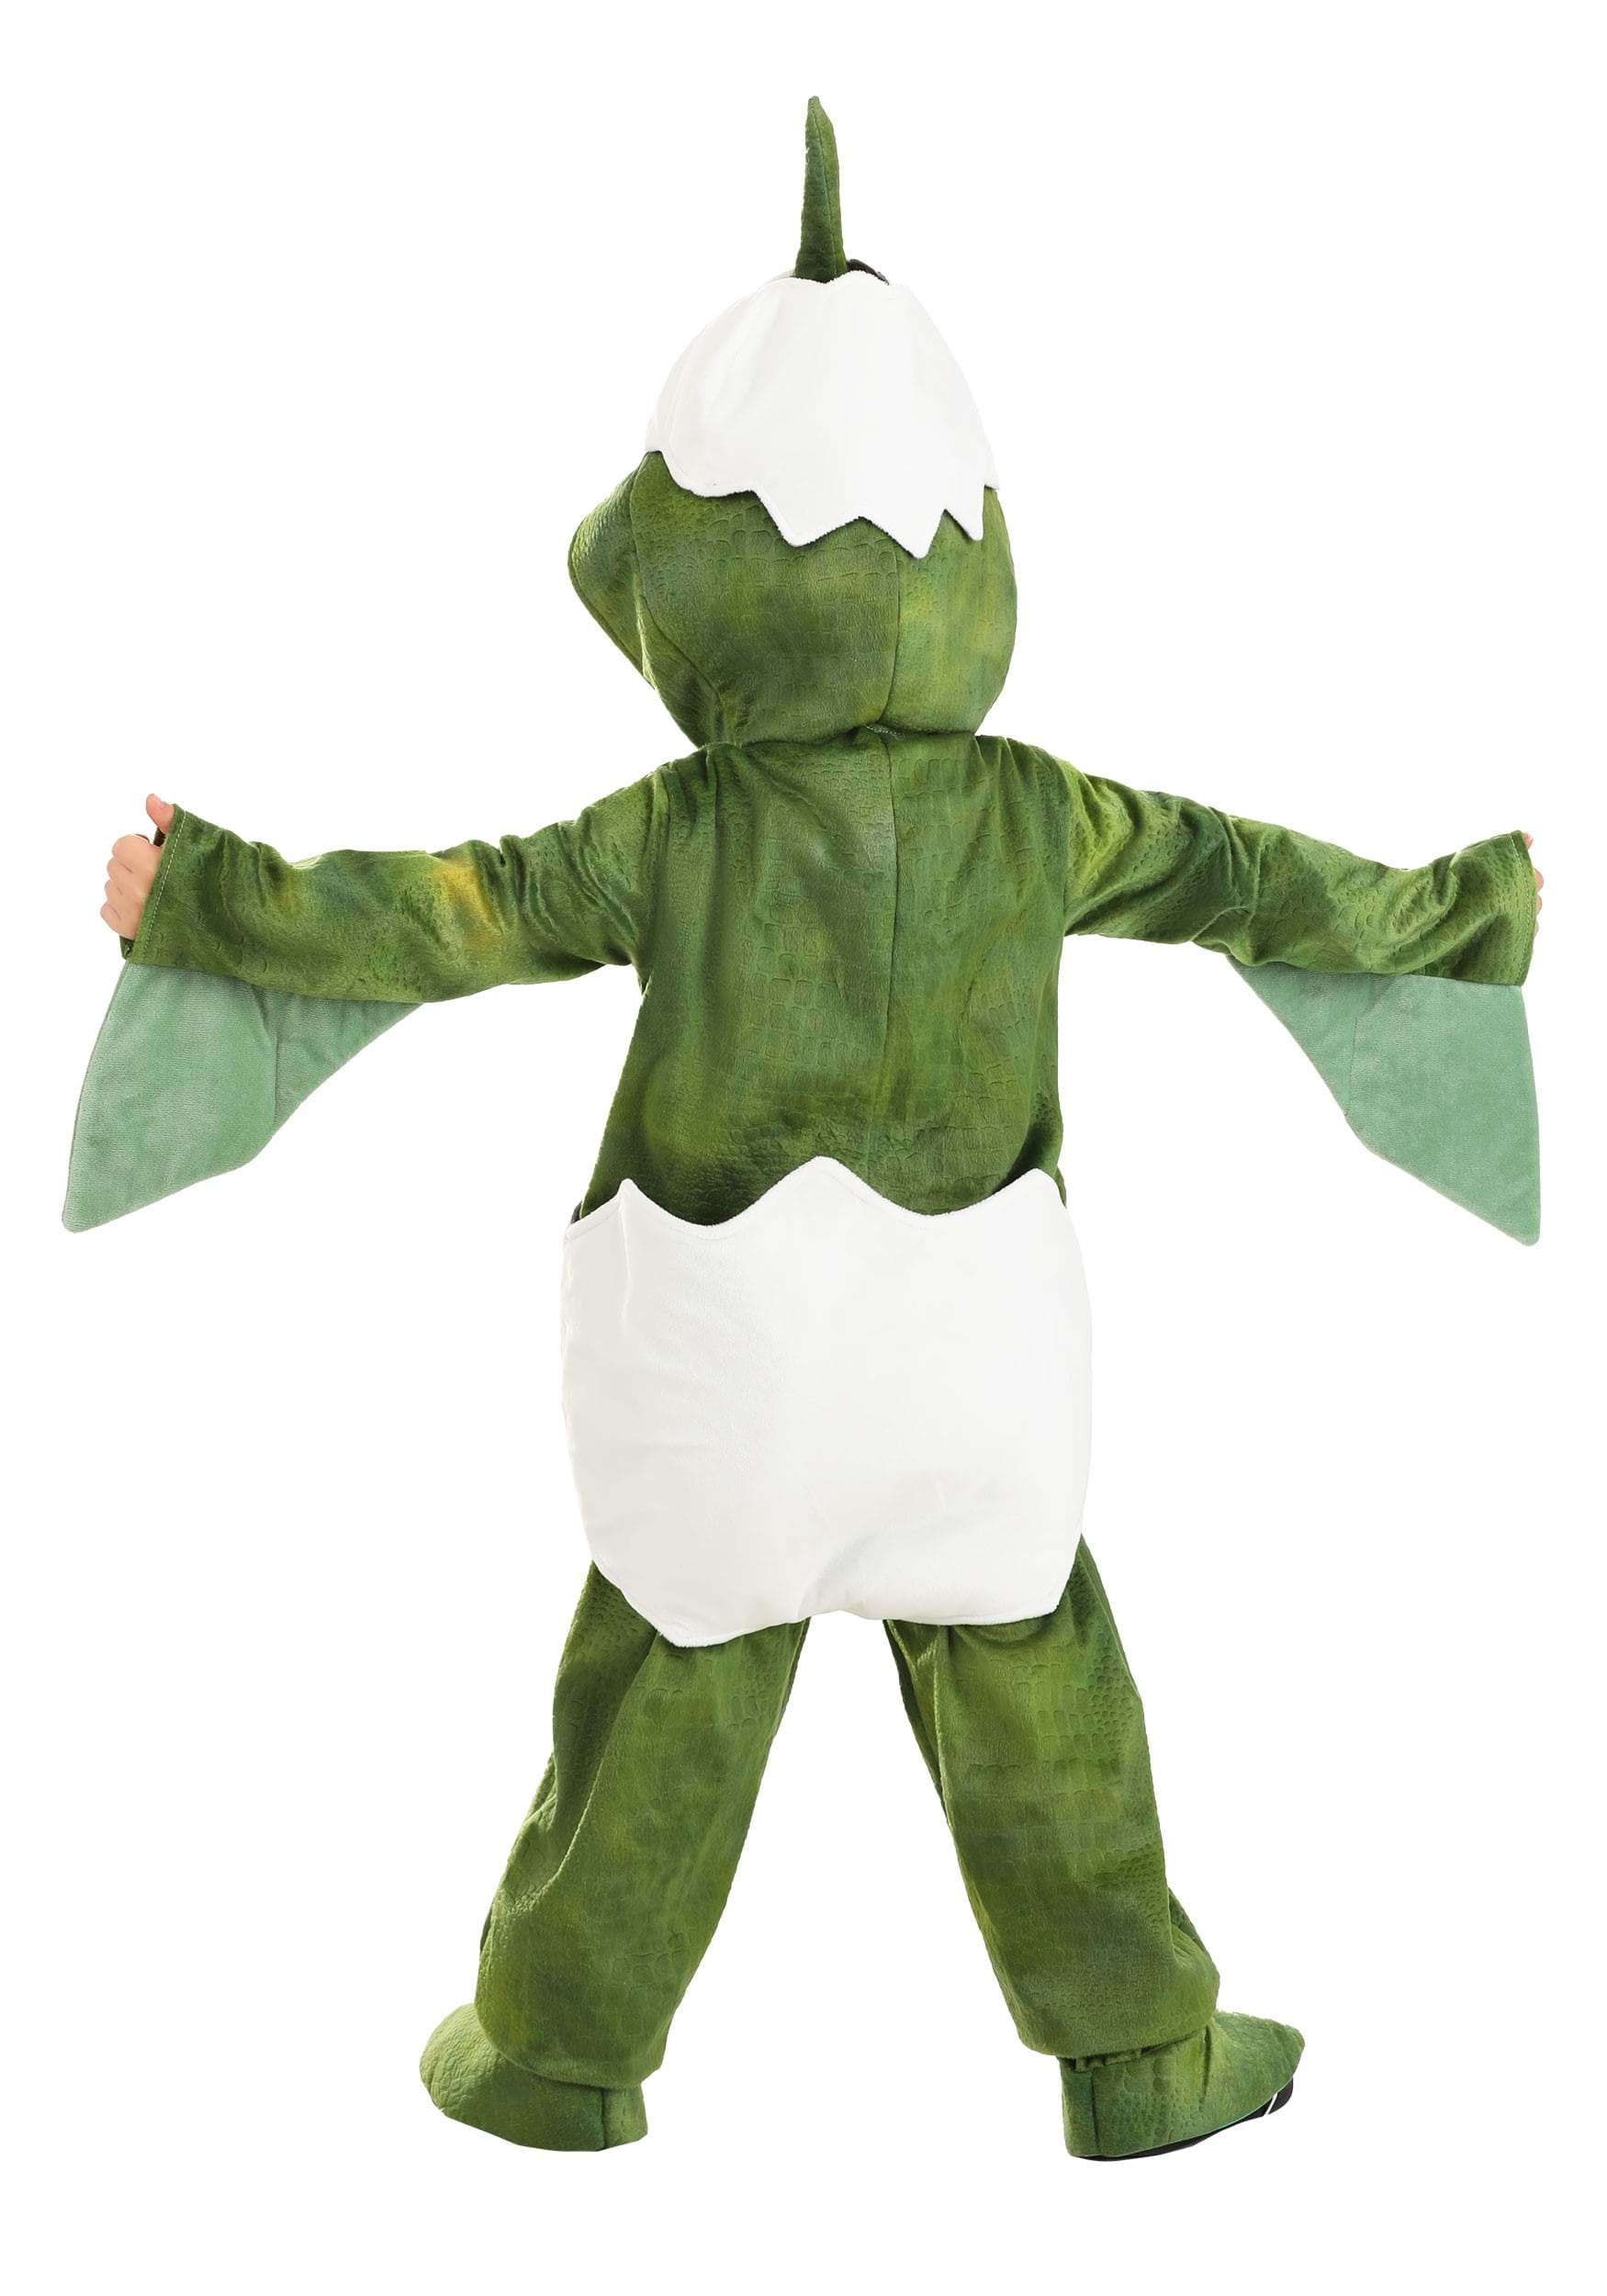 HalloweenCostumes.com 0-3 Months Hatching Pterodactyl Infant Costume.,  White/Green/Green